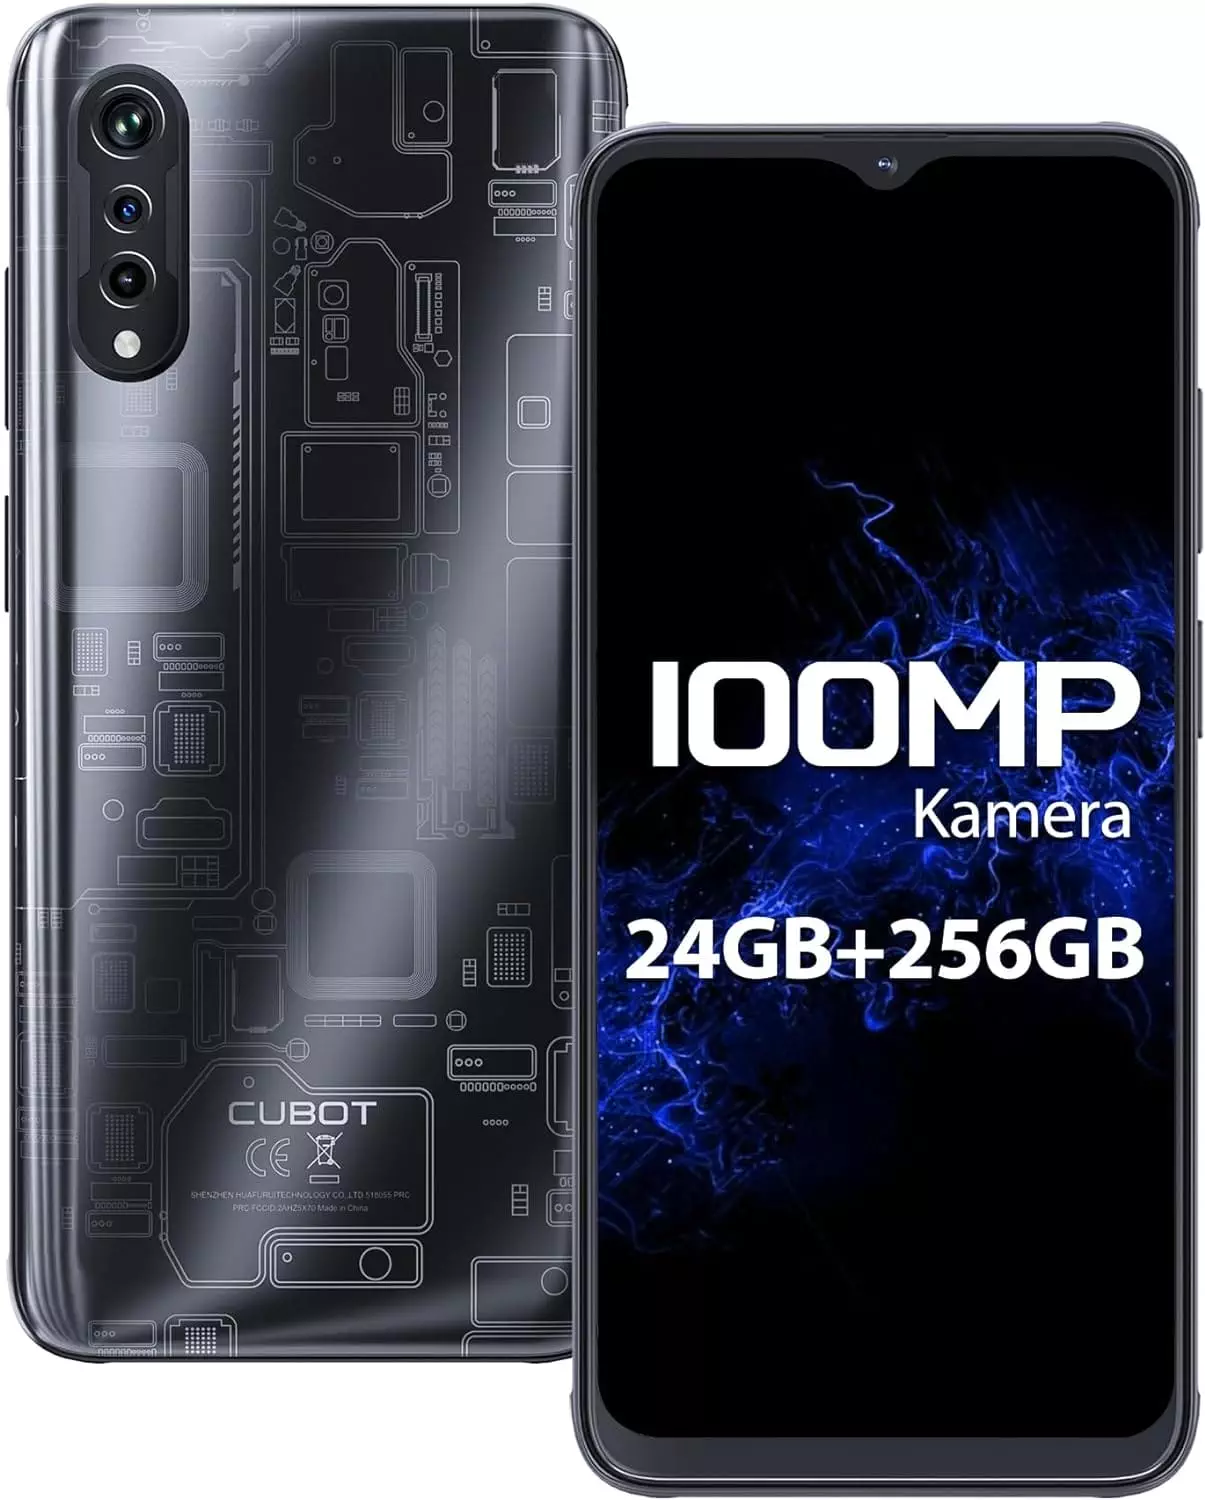 CUBOT X70 Mobile Phone without Contract, Android 13 Smartphone, 24GB + 256GB/1TB Expandable, 100MP Camera, Octa Core MediaTek Helio G99, 6.583 Inch FHD+, 5200 mAh Battery, Dual SIM 4G Mobile Phone,